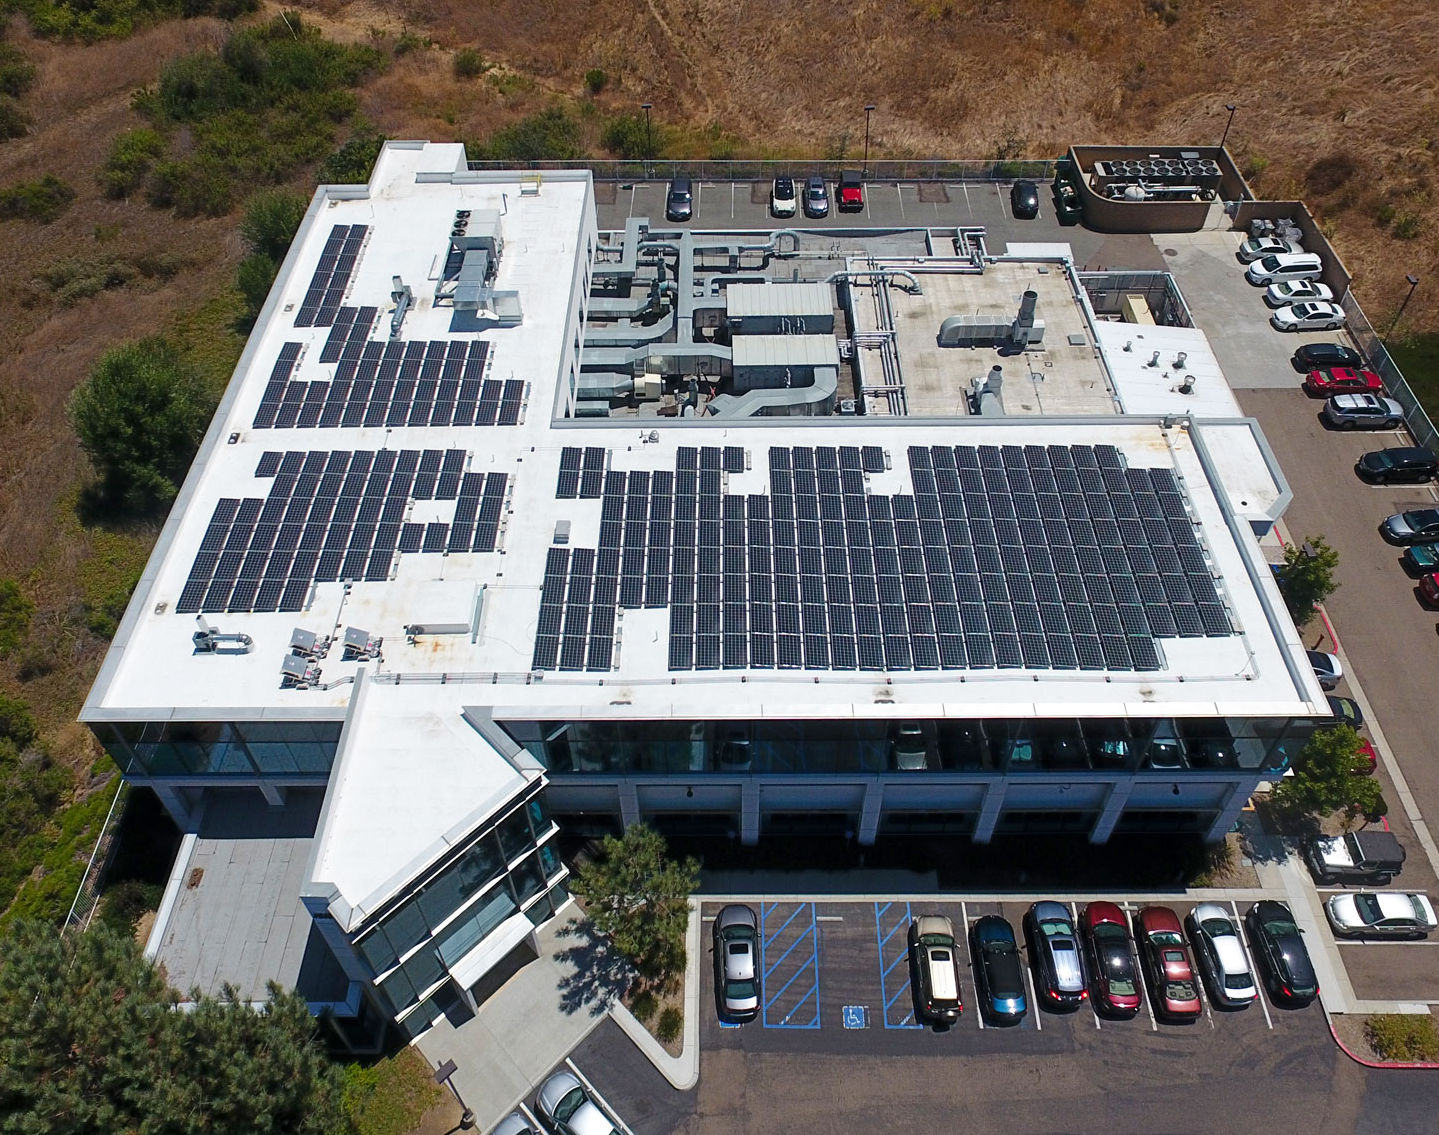 According to the EPA, Ferring Research Institute’s new solar system will save the equivalent of annual greenhouse gas emissions from 213,564 miles driven by an average passenger vehicle.